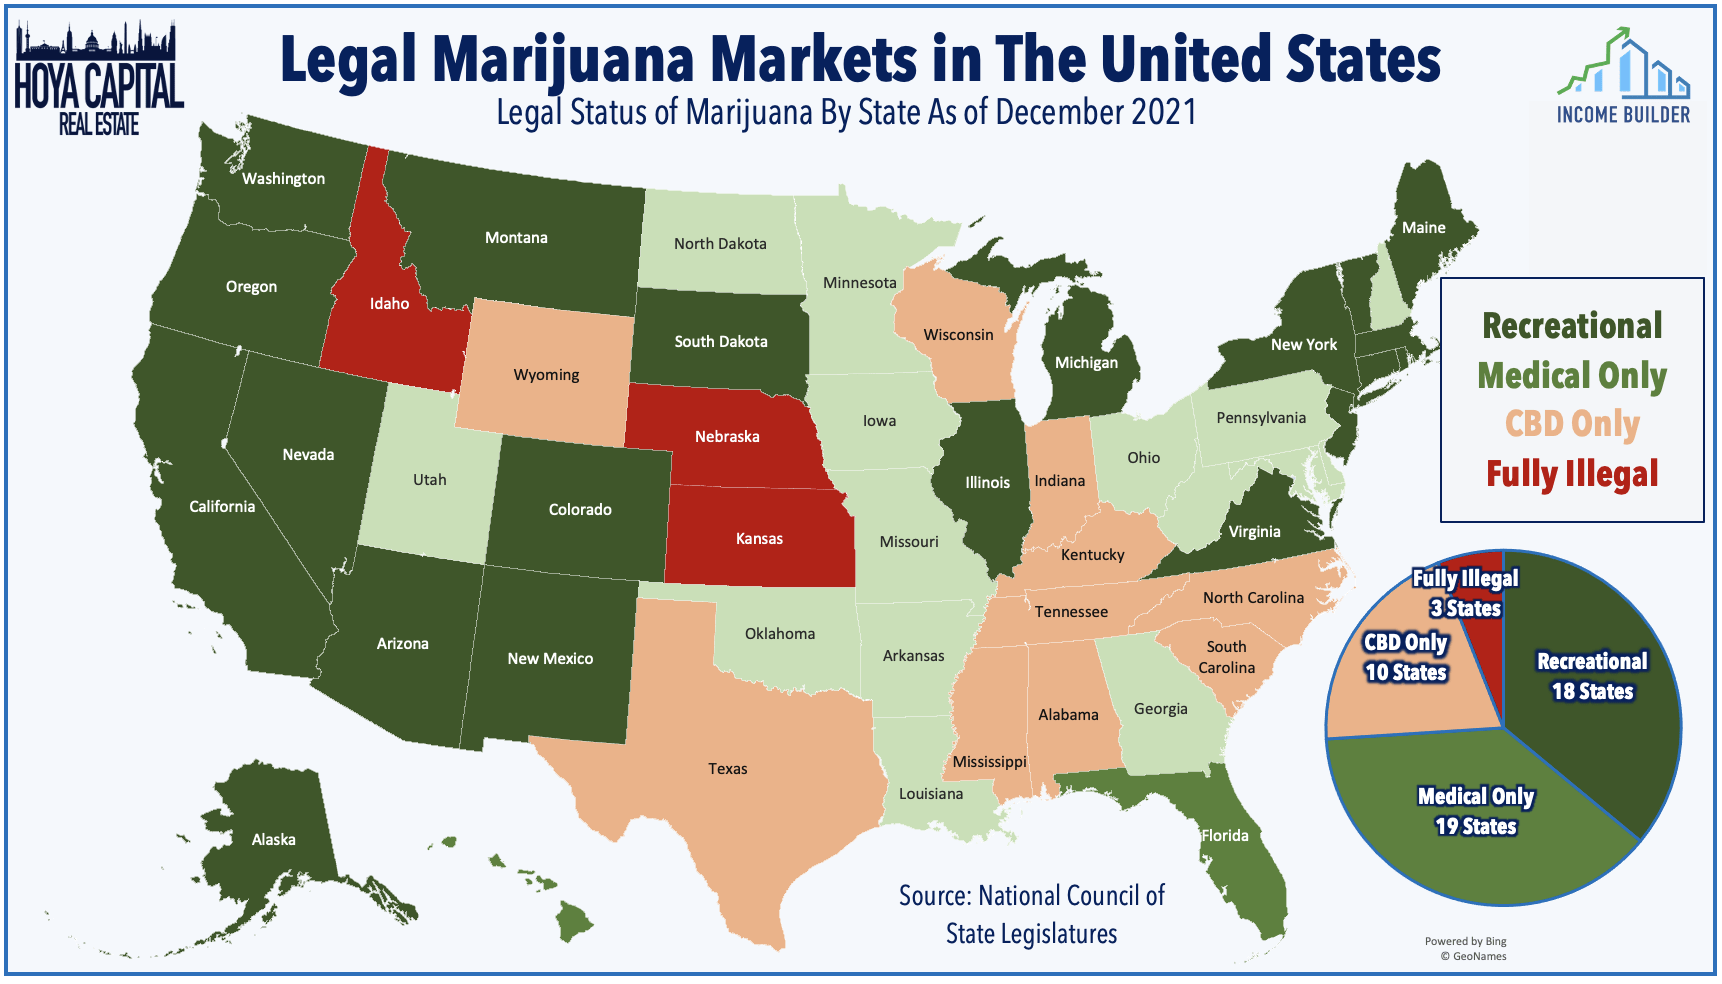 Map of U.S., showing various states of legalization